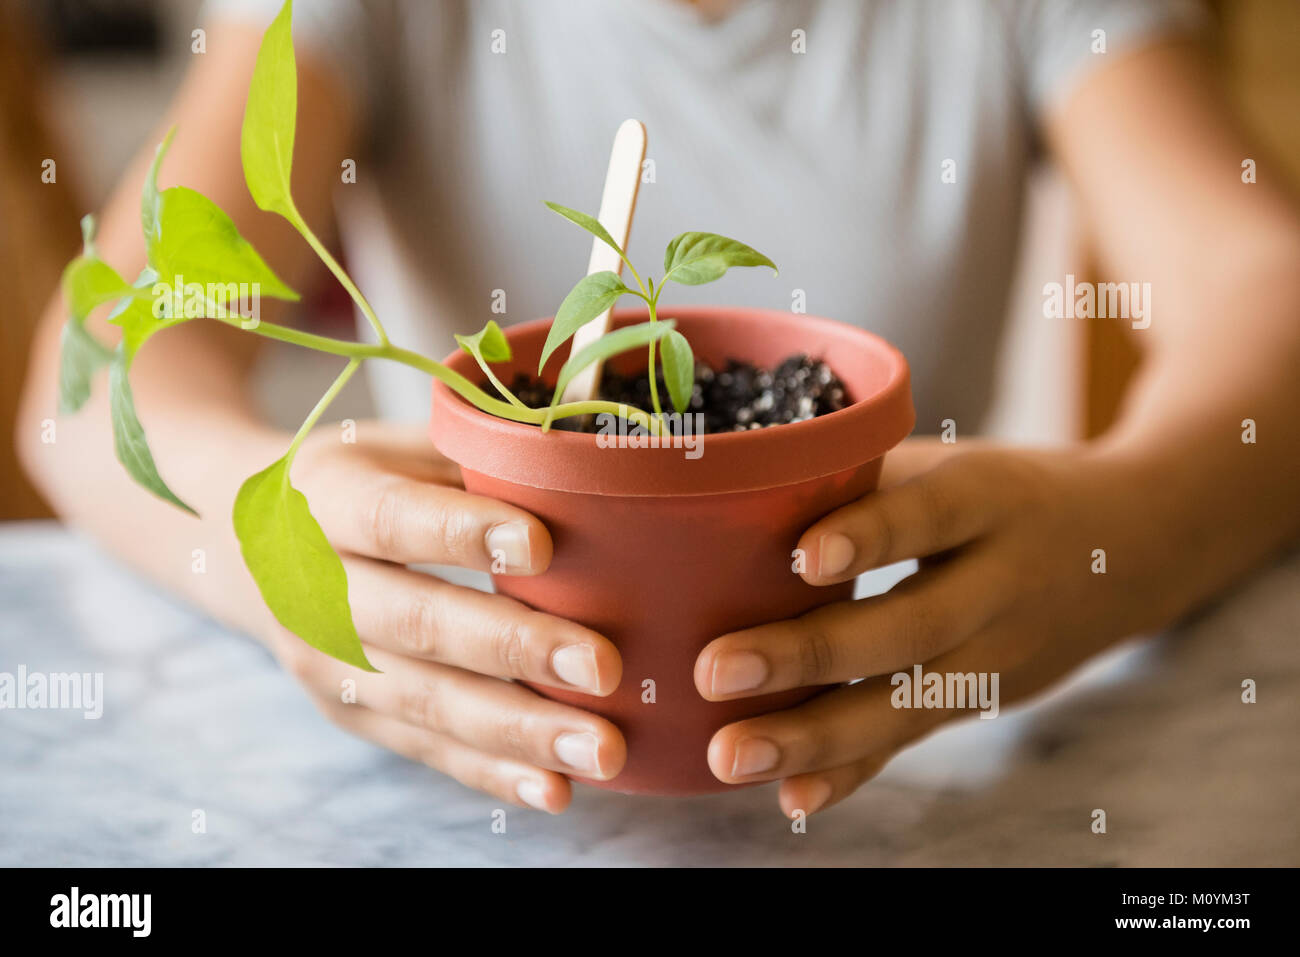 Hands of African American woman holding plant Stock Photo